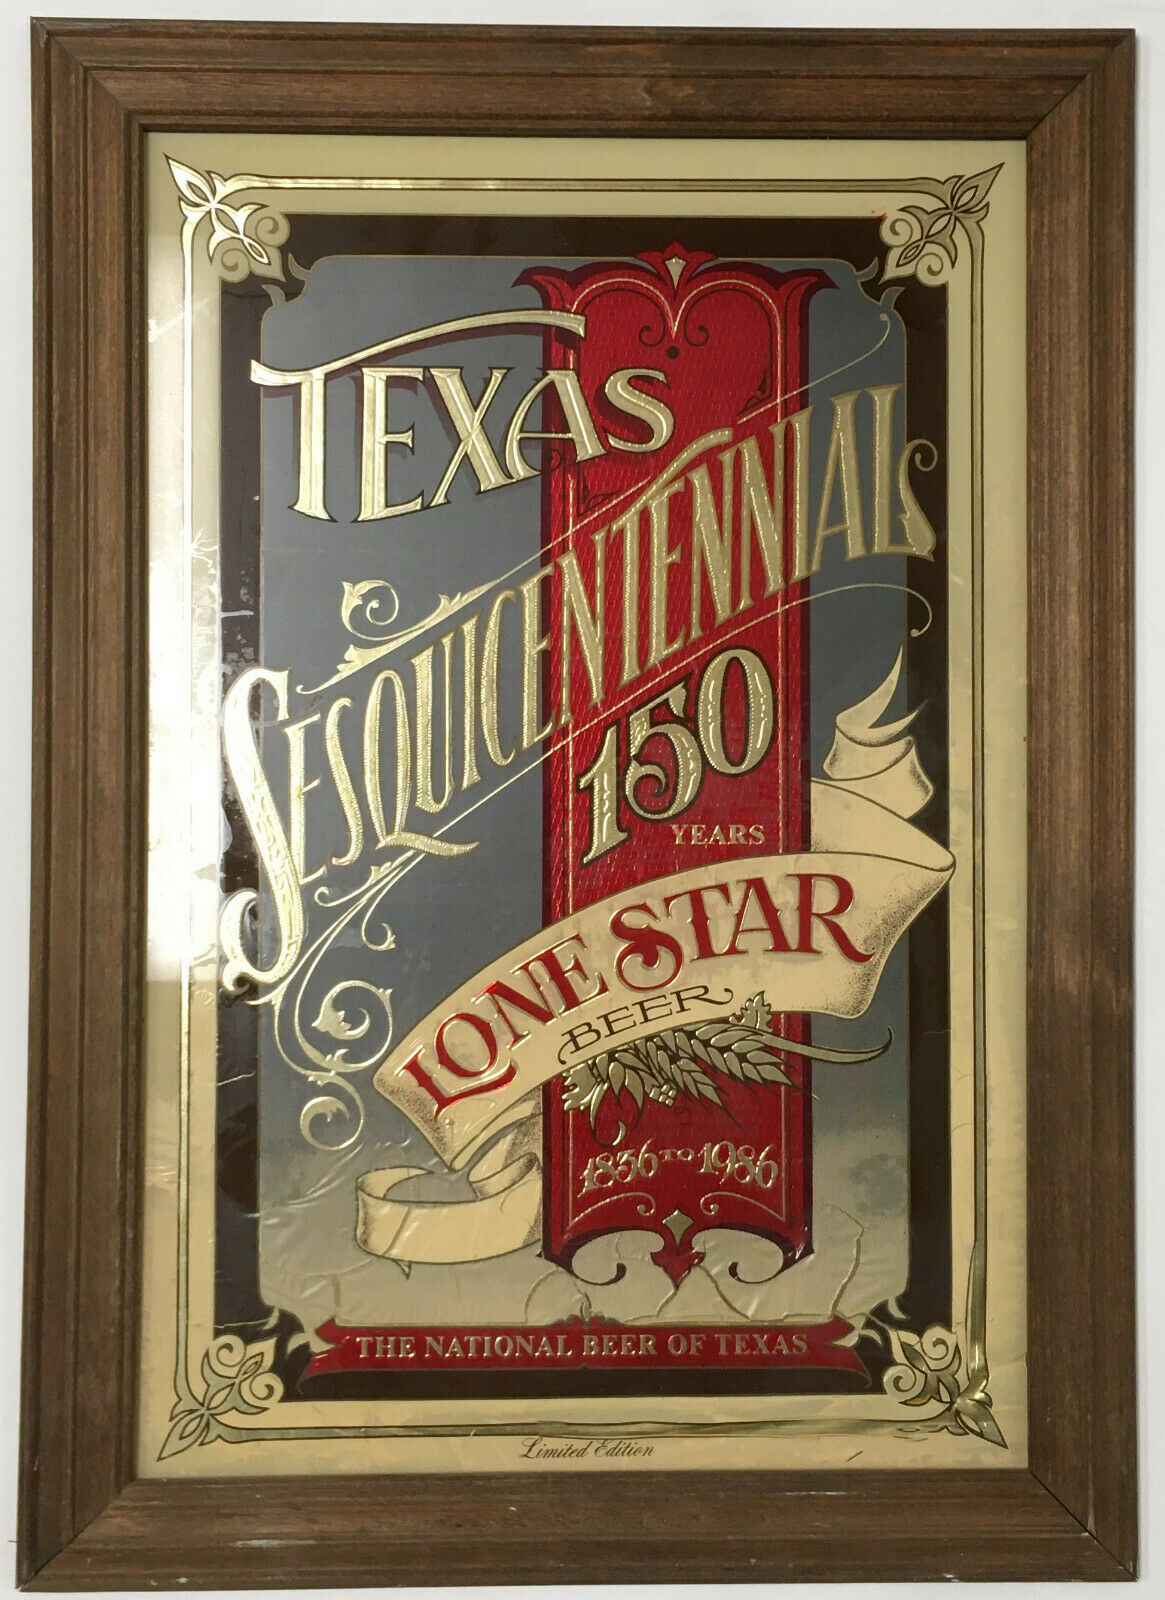 Texas Sesquicentennial 150 Years Lone Star Beer National Beer Of Texas Print